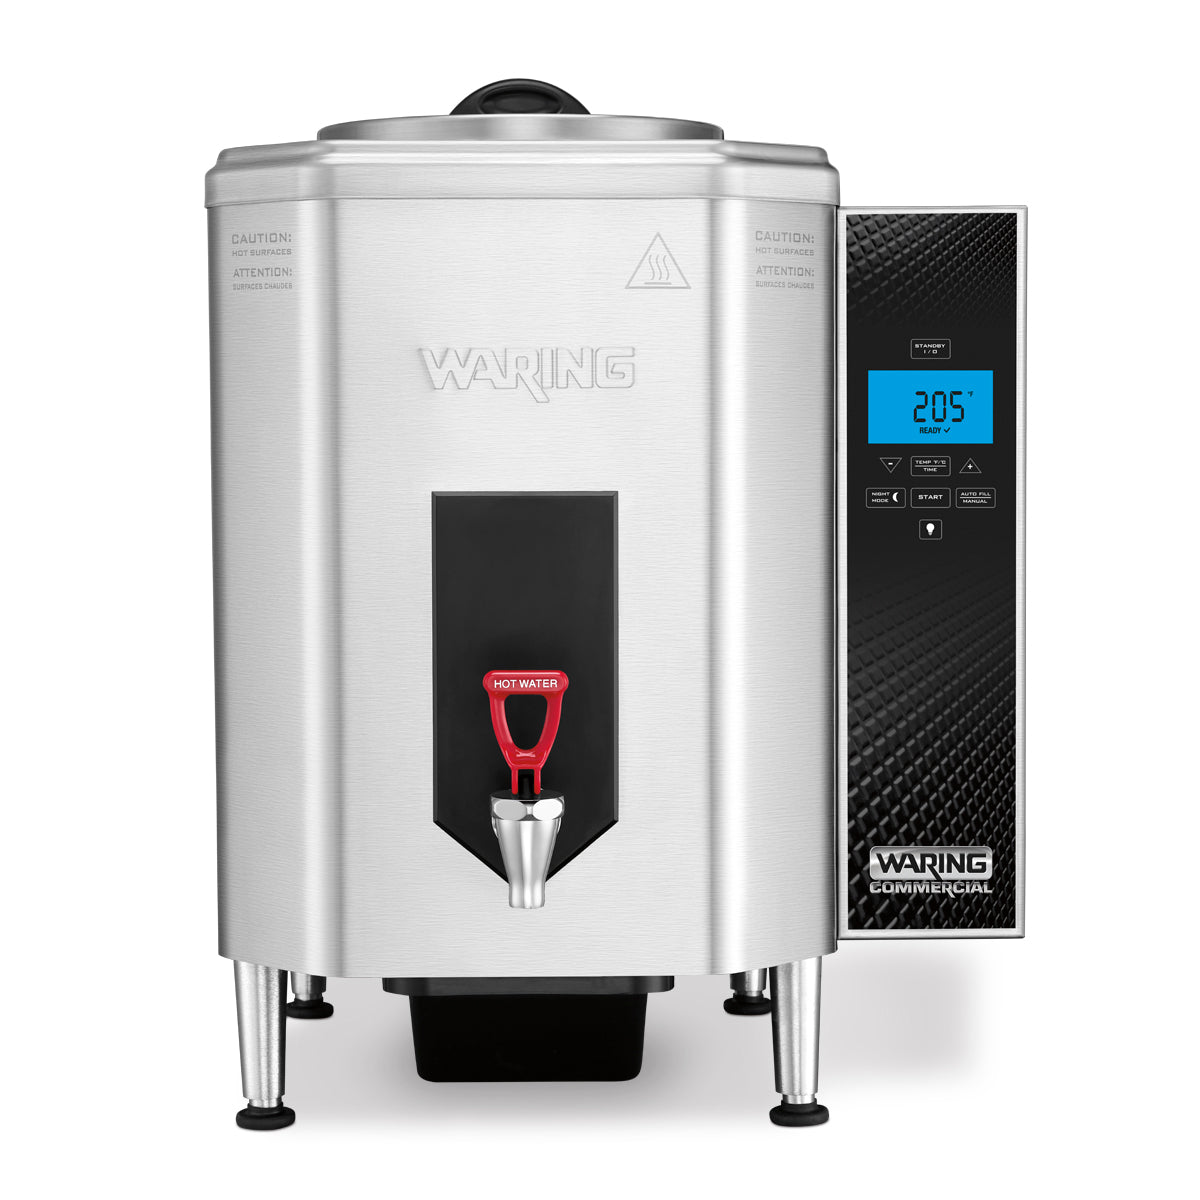 WWB10G 10-Gallon Hot Water Dispenser by Waring Commercial